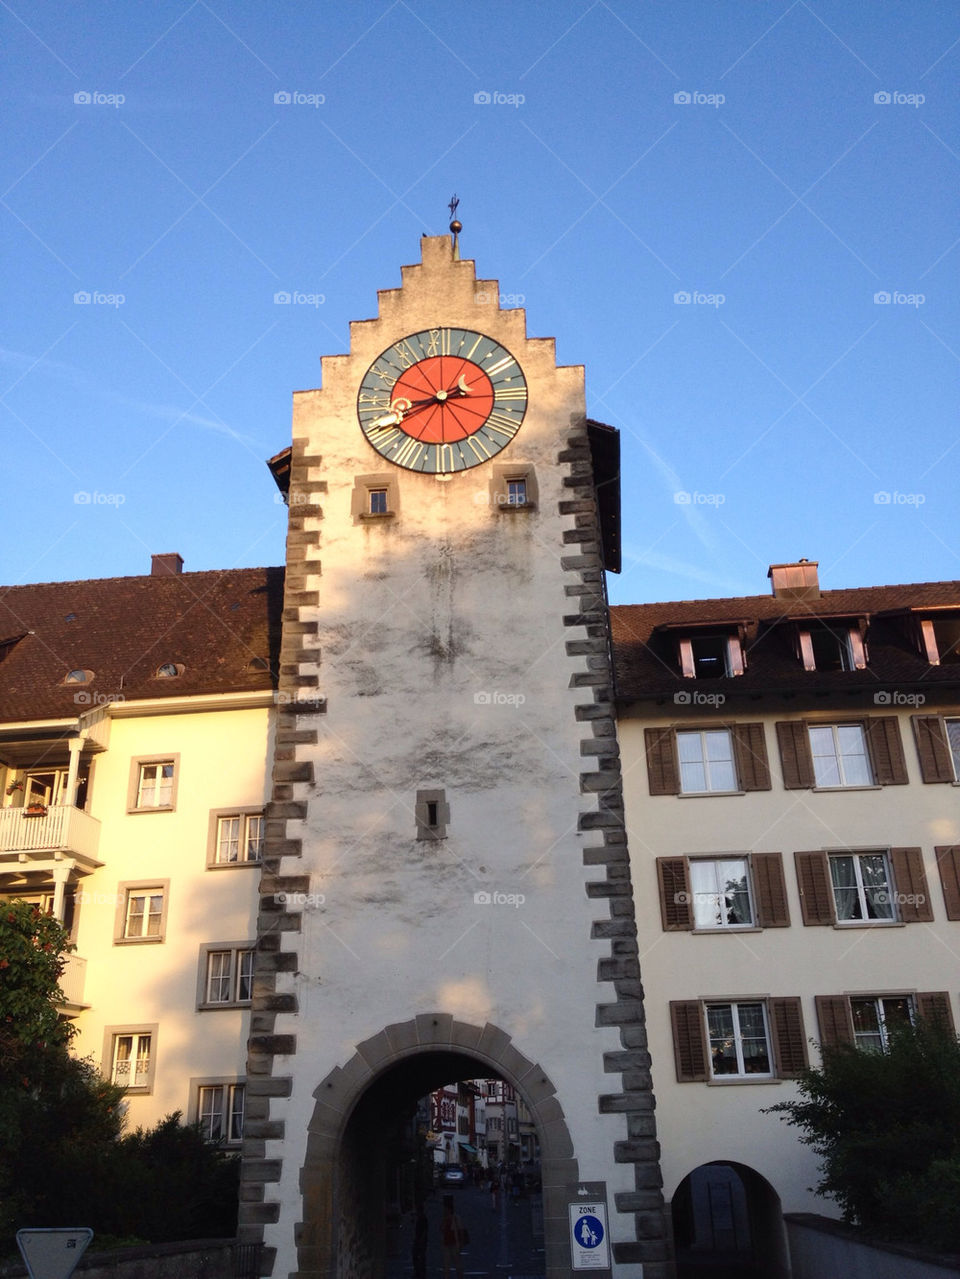 oldtown switzerland arch historic by twister